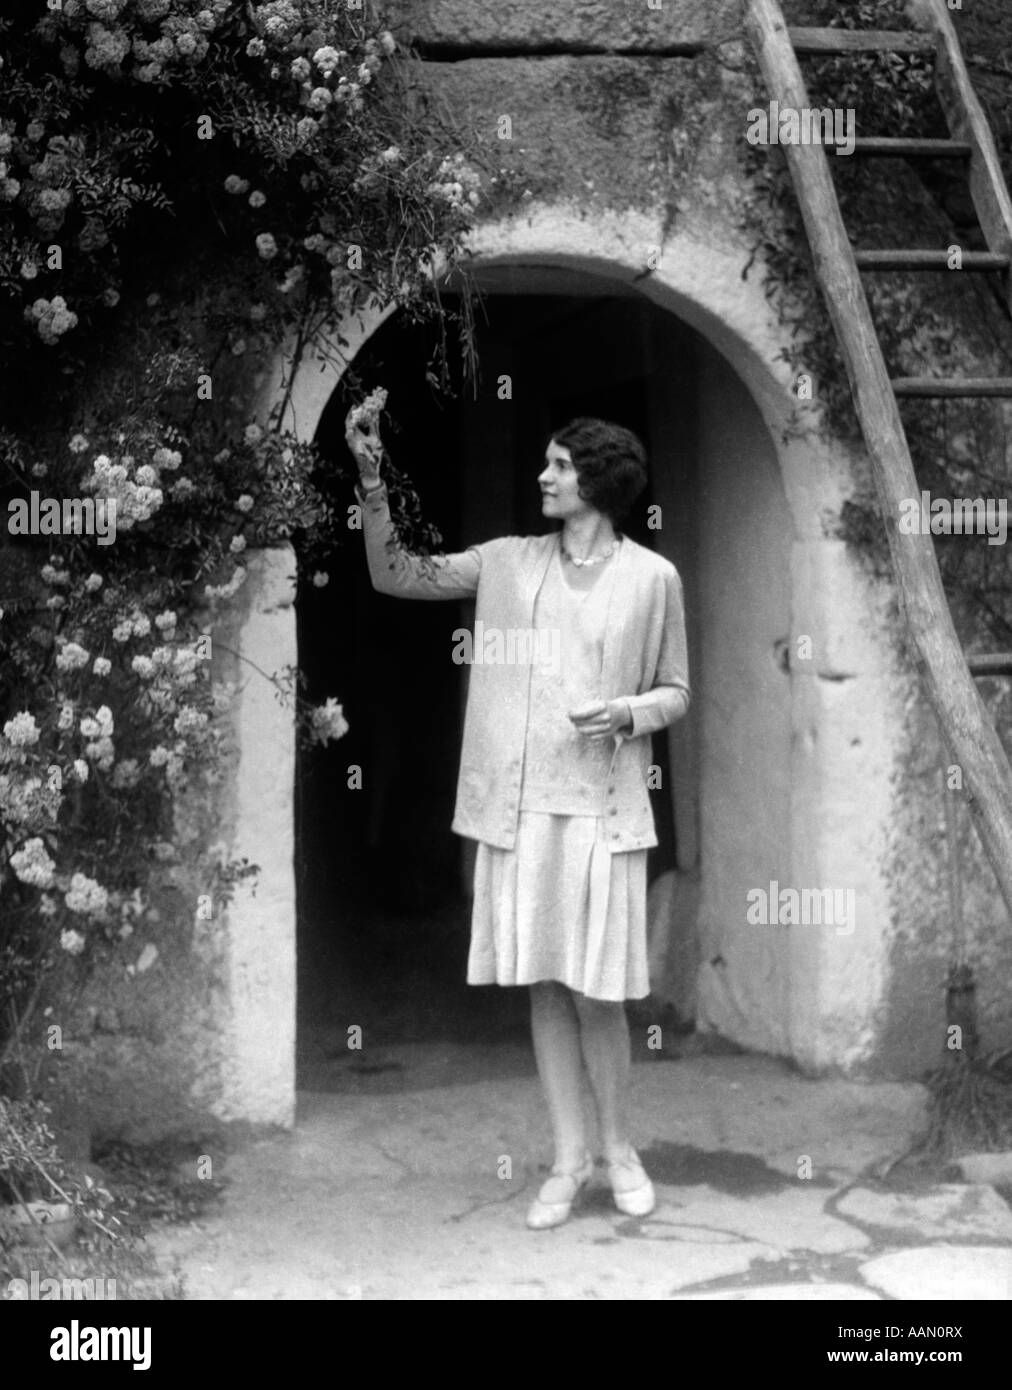 1930s WOMAN IN FLAPPER OUTFIT STANDING IN FRONT OF WHITEWASHED ARCHWAY WITH FLOWERS PICKING BUD BRITTANY FRANCE Stock Photo